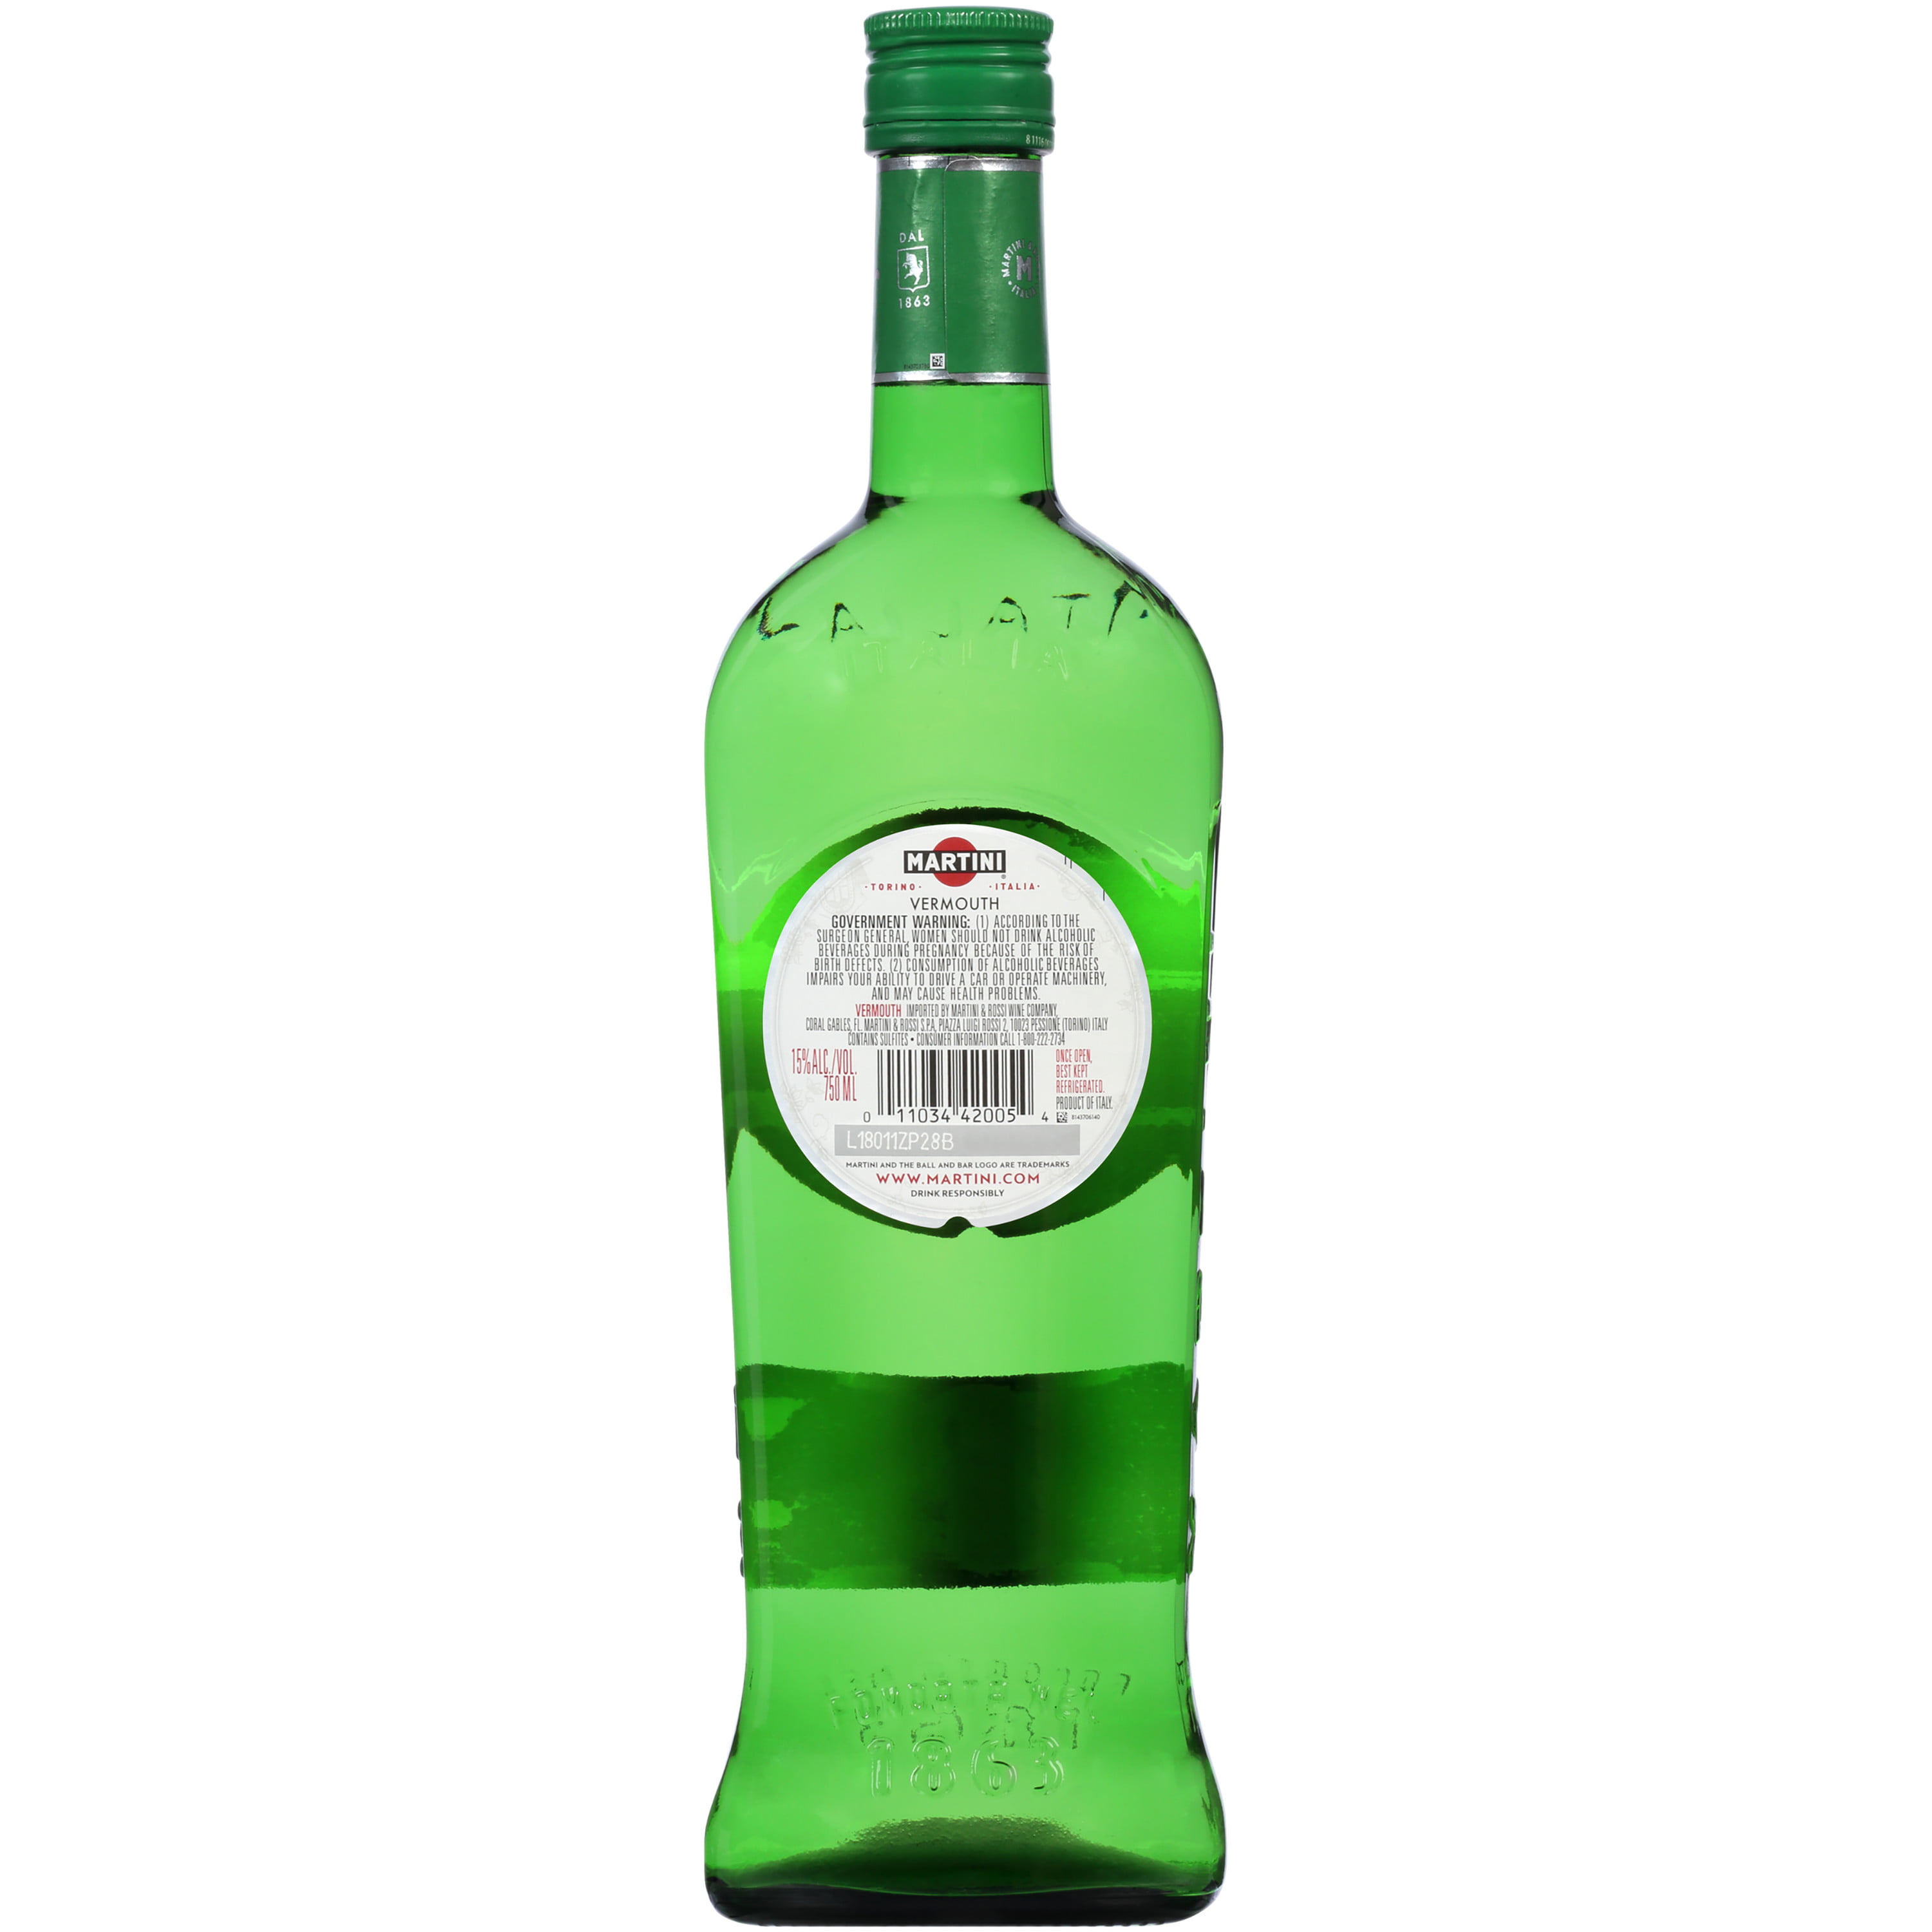 MARTINI & ROSSI Extra mL 750 15% Mixer, Vermouth ABV Cocktail Dry Bottle